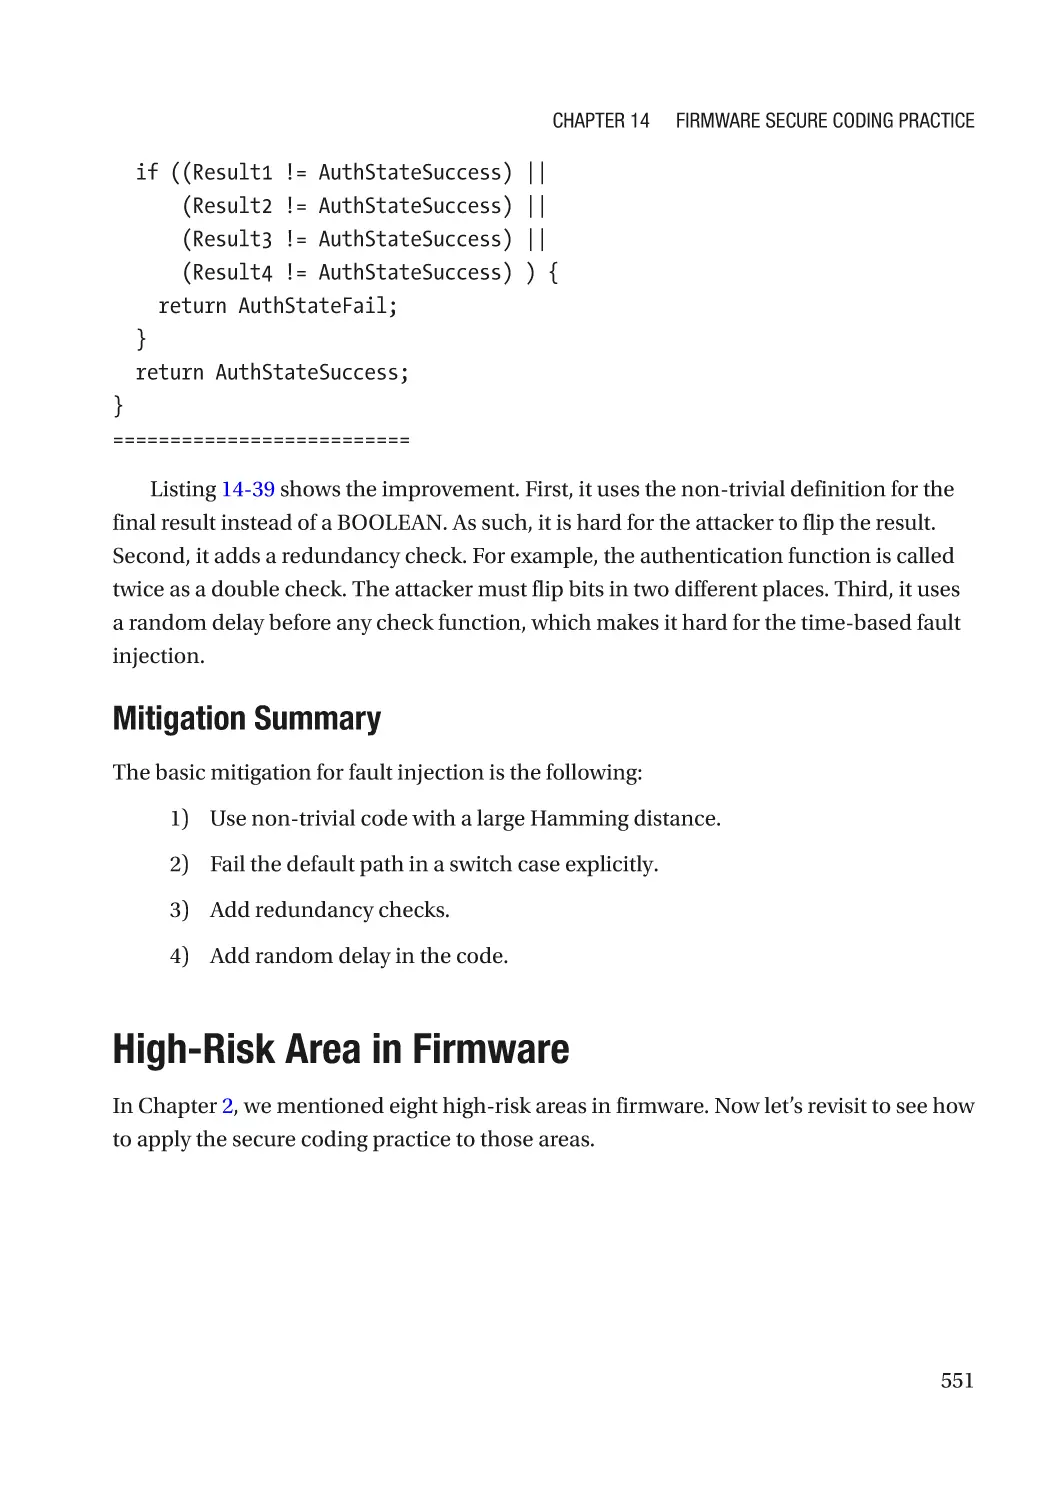 Mitigation Summary
High-Risk Area in Firmware